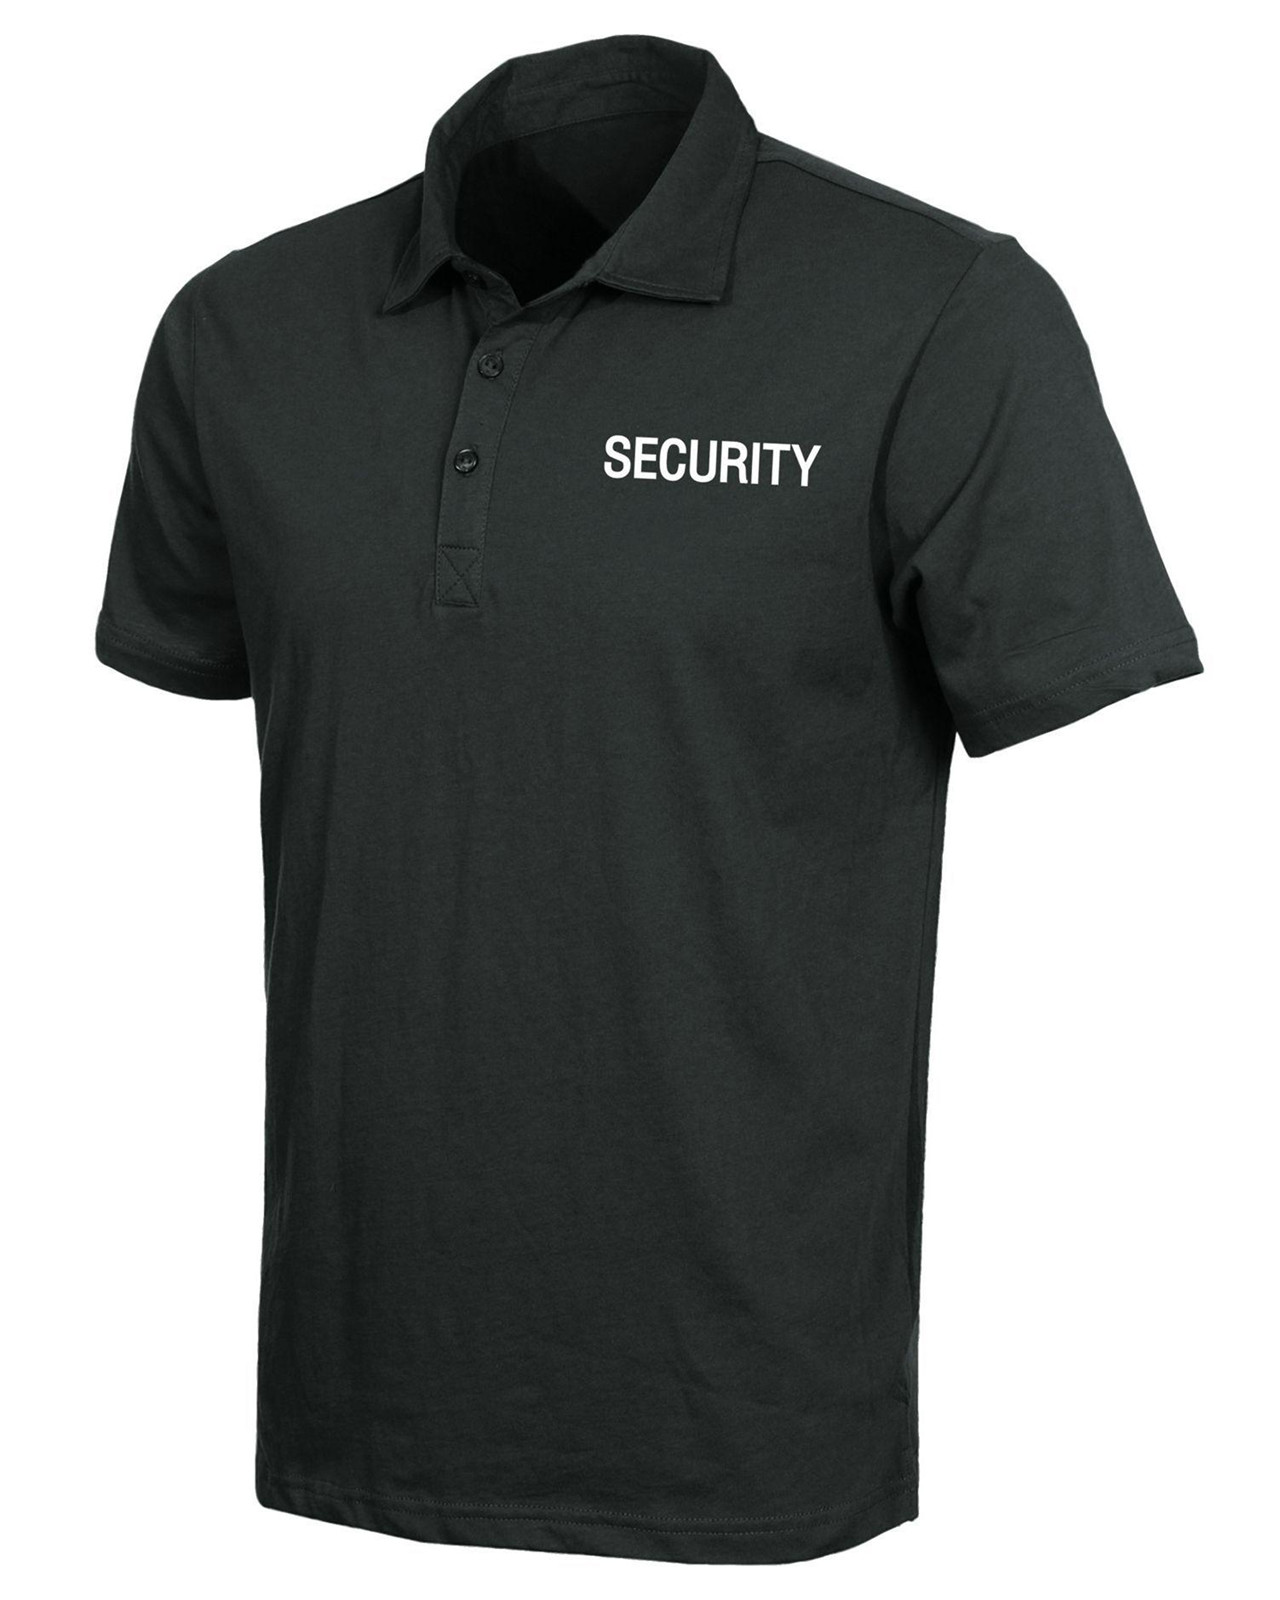 12: Rothco Svedtransporterende Polo T-shirt (Sort m. Security, M)